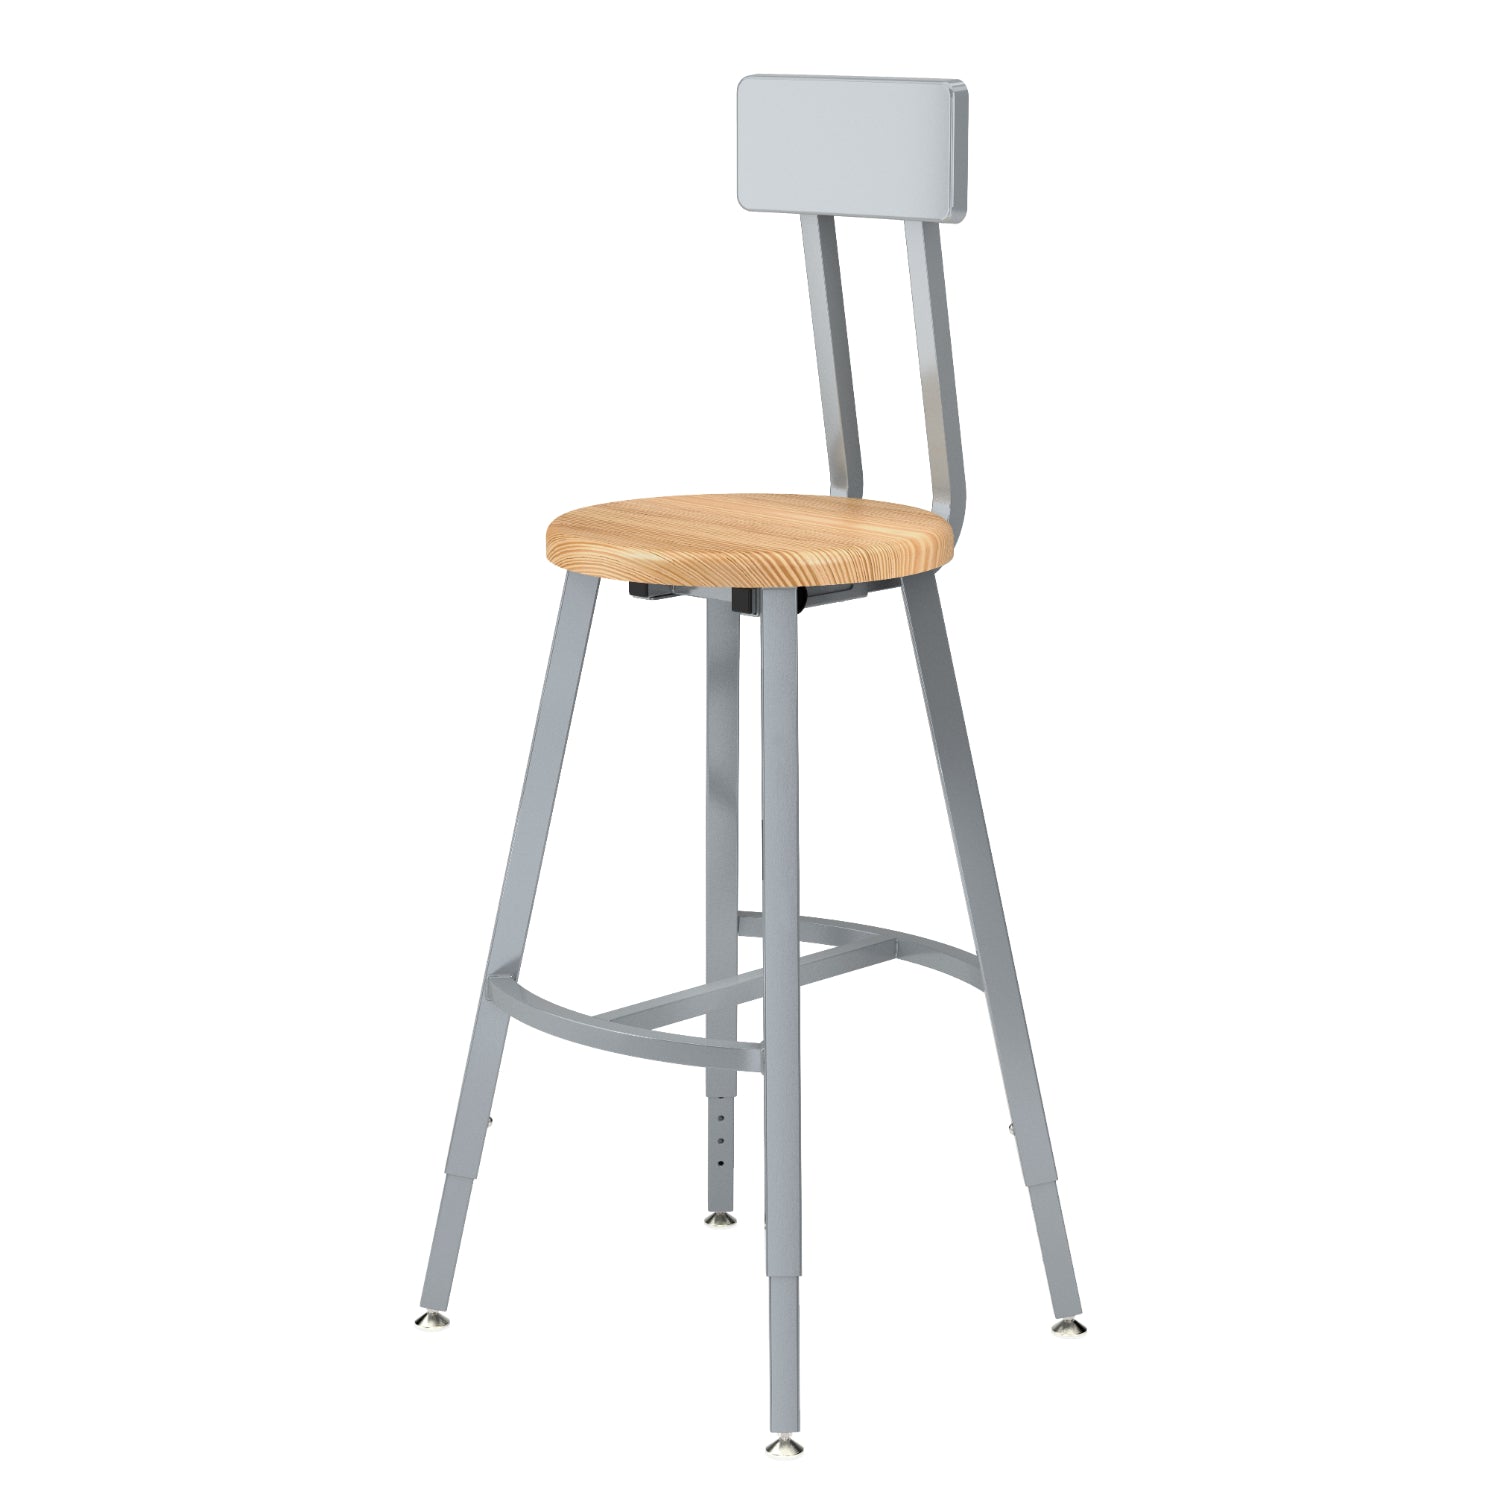 Titan Adjustable Height Stool with Backrest, Solid Oak Seat, 24-32" Seat Height